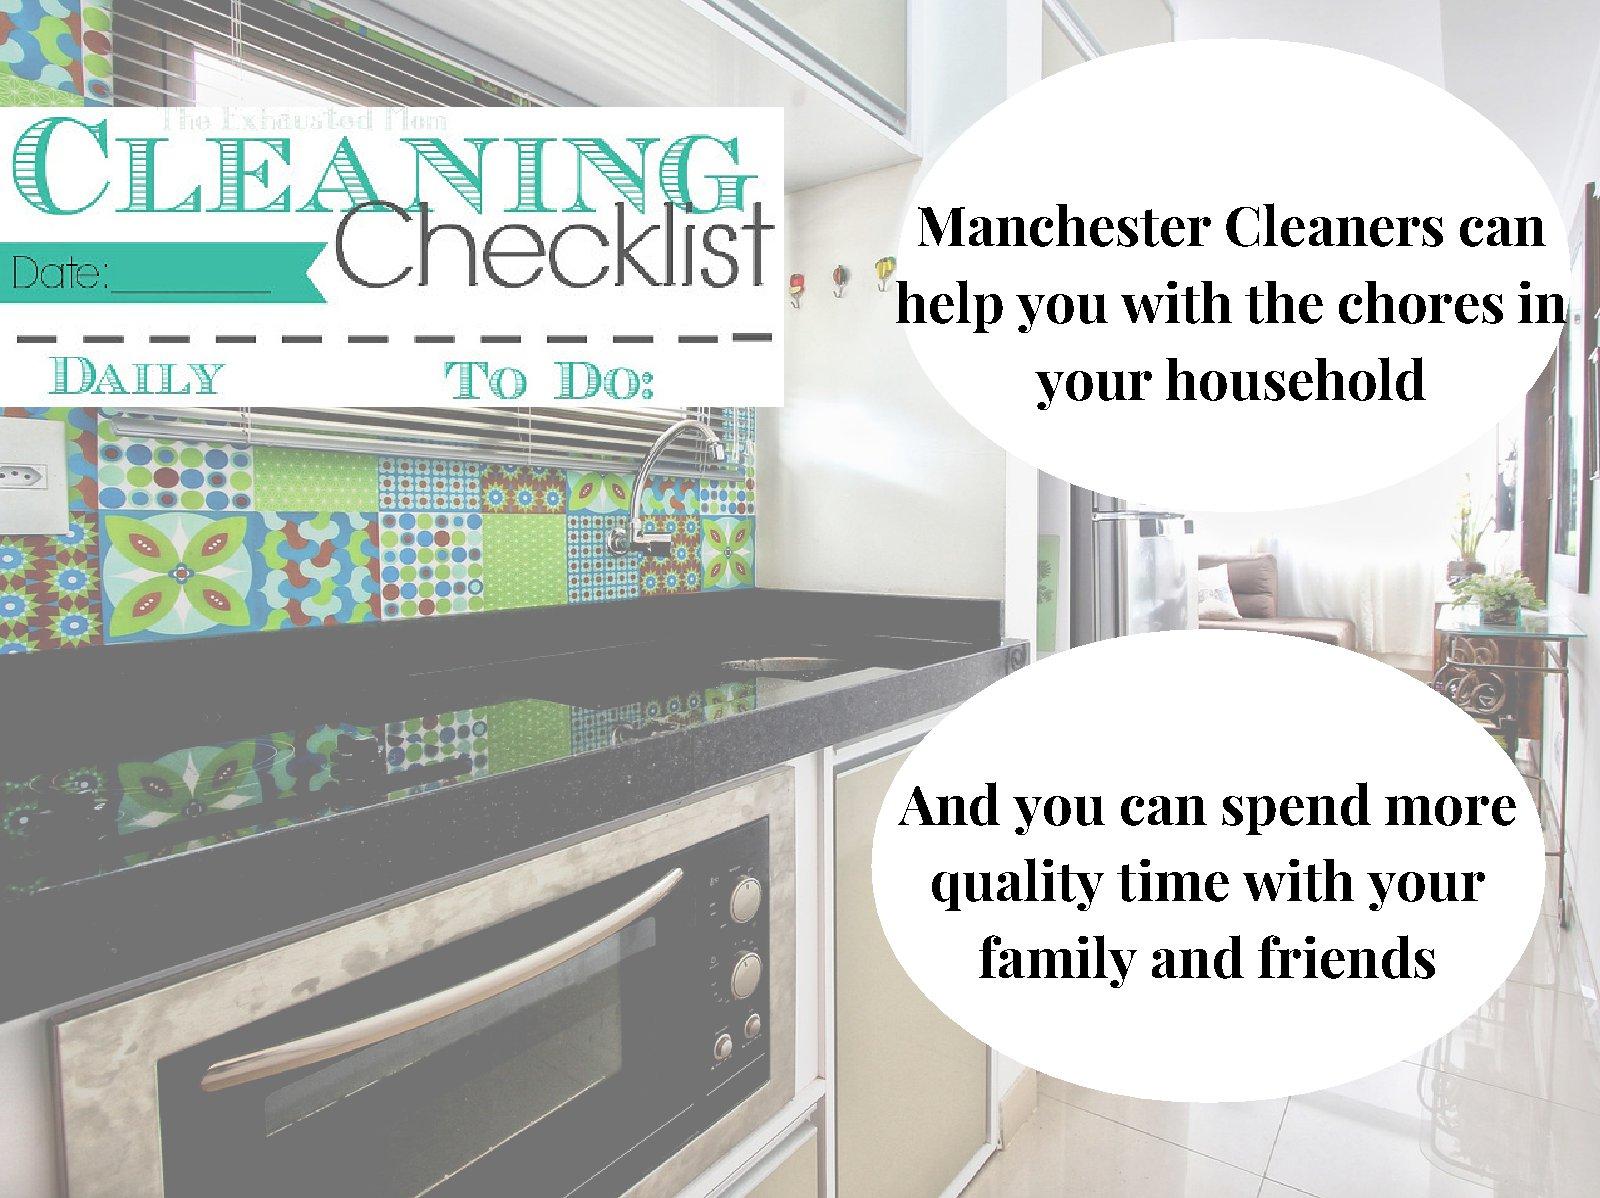 Licensed Cleaning Services in M24, Manchester